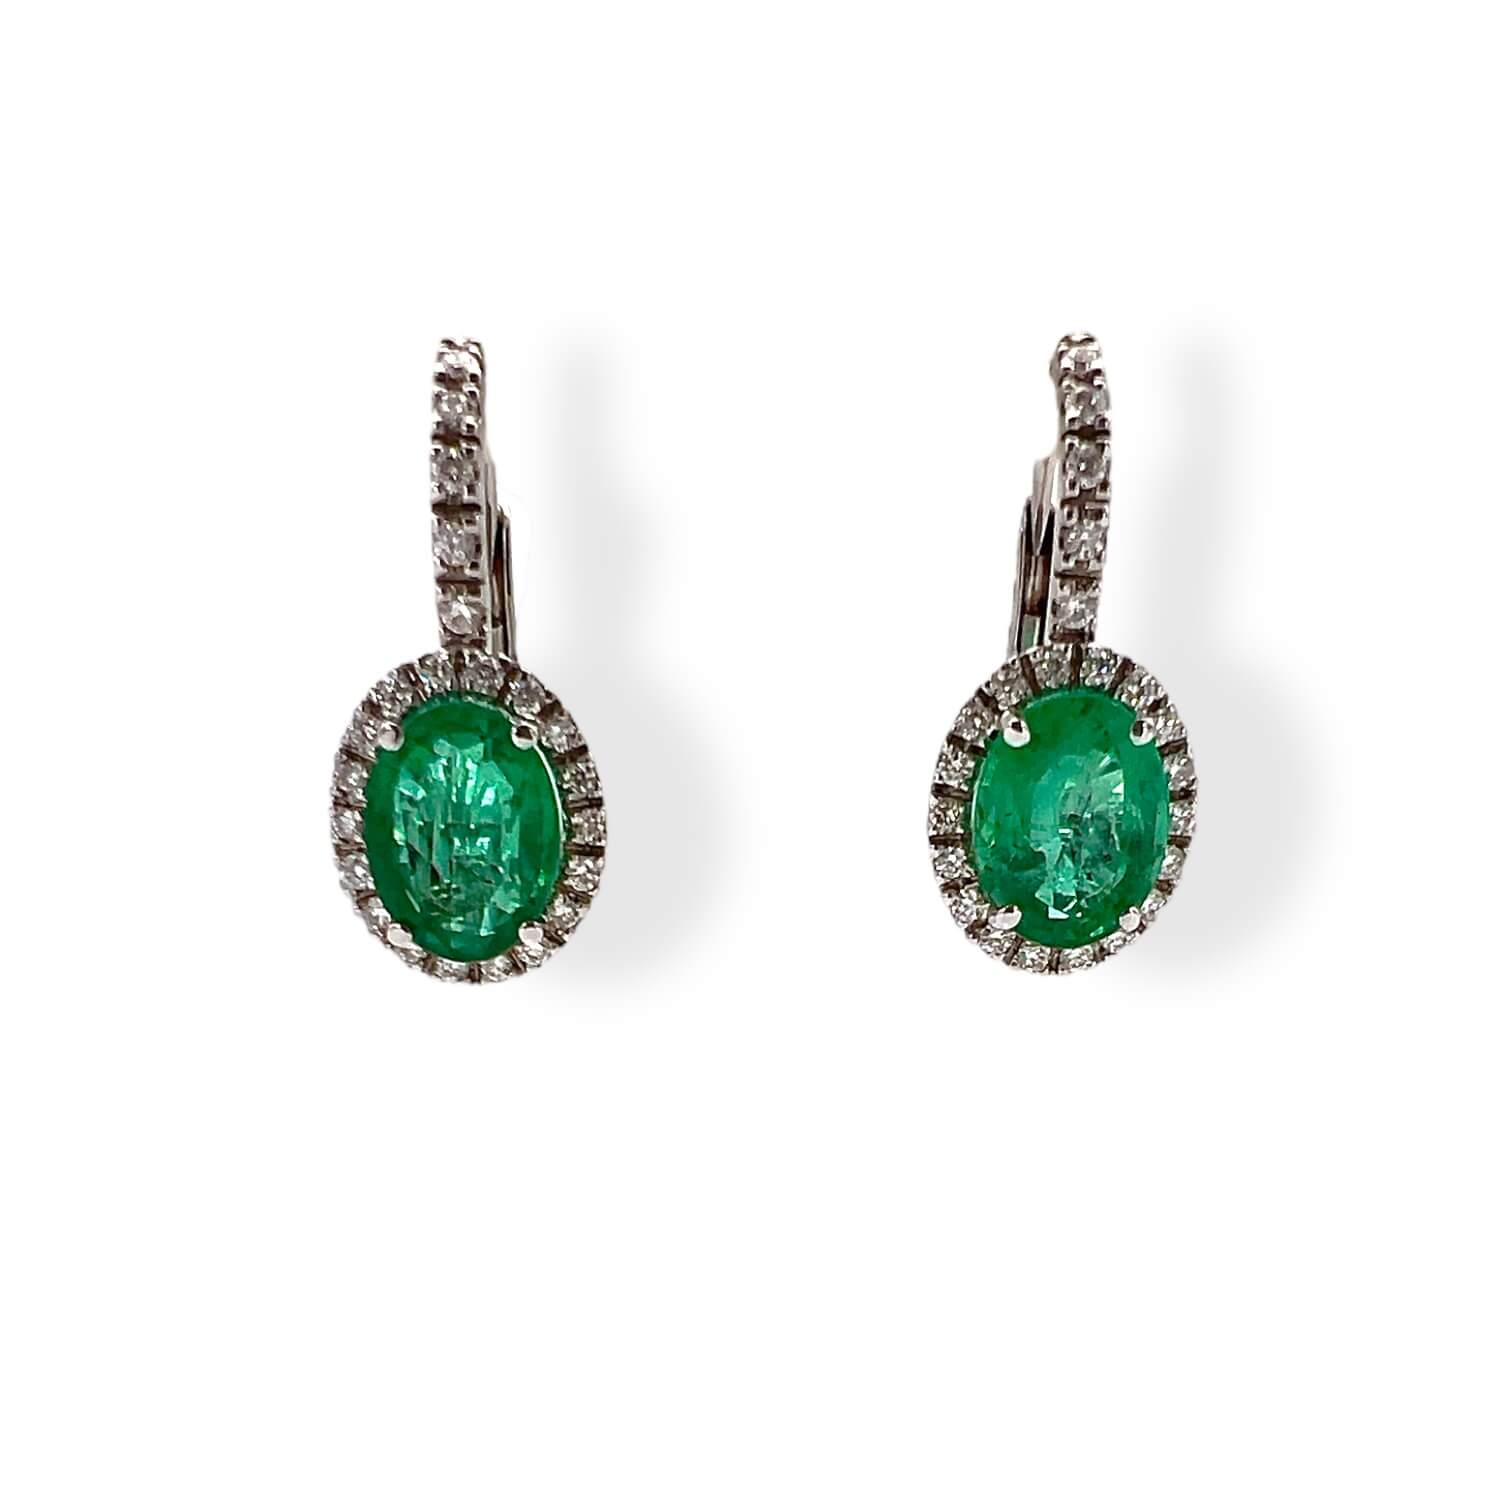 BELLE EPOQUE Diamond and Gold Emerald Earrings Art.OR485